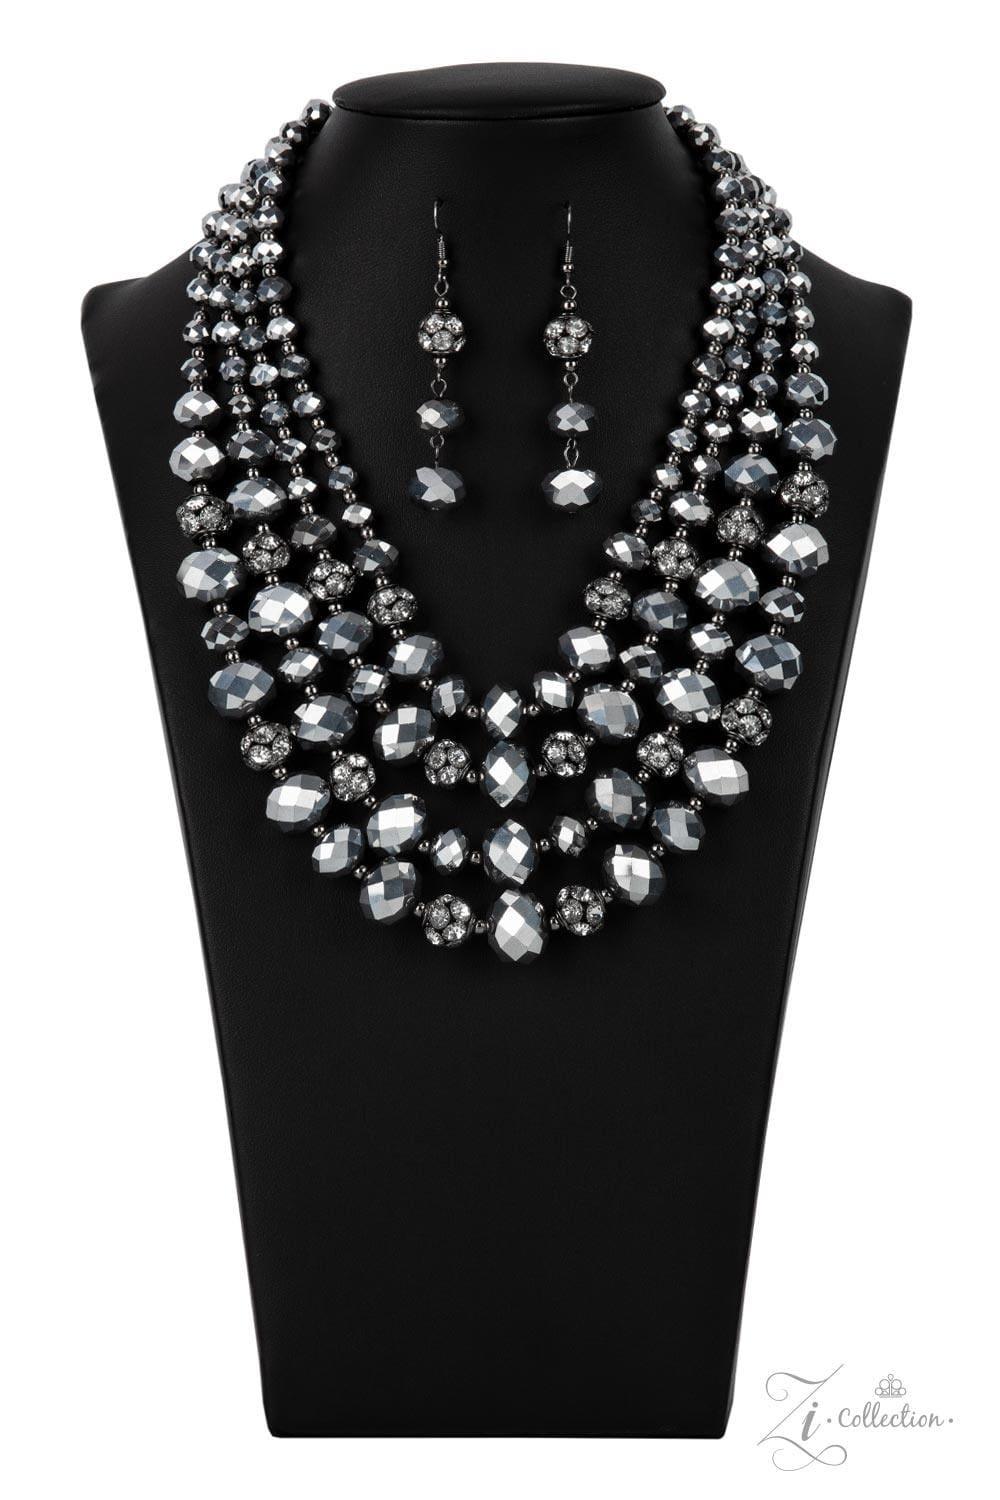 Paparazzi Accessories - Influential - 2021 Zi Collection Necklace - Bling by JessieK